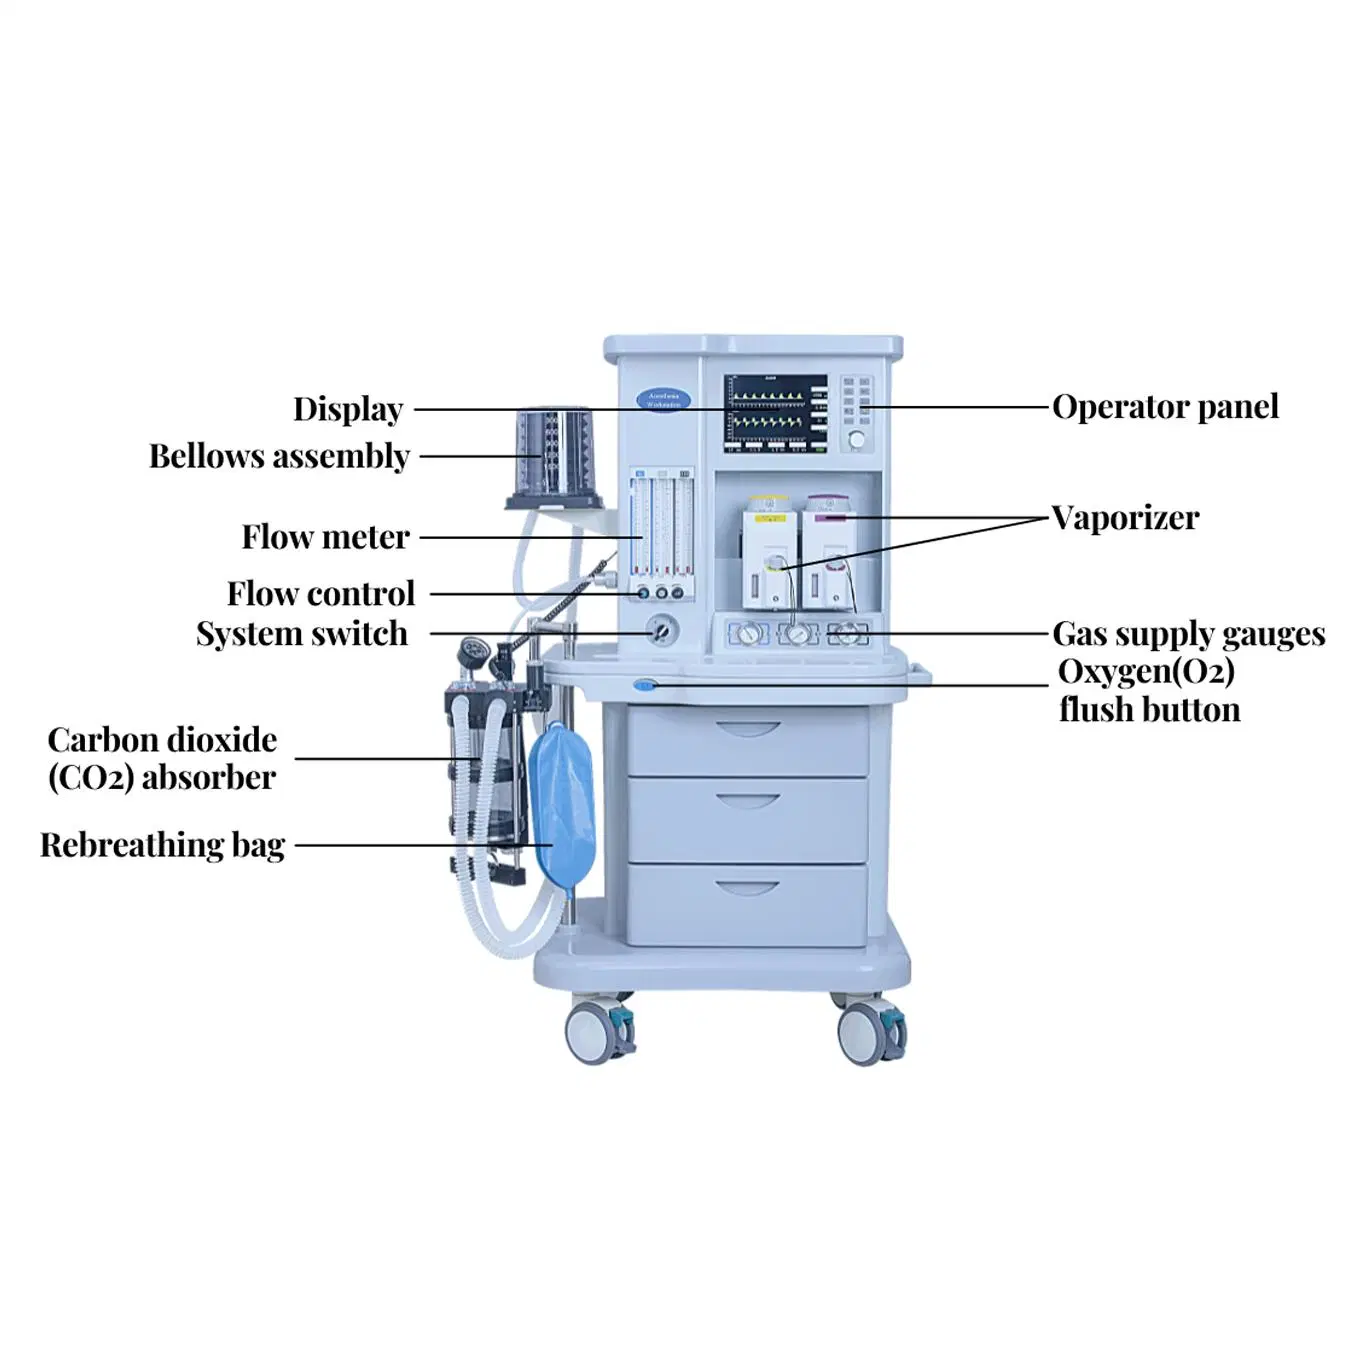 Hospital Surgical Operation Equipment with Patient Monitor Medical Anesthesia Machine Supplies